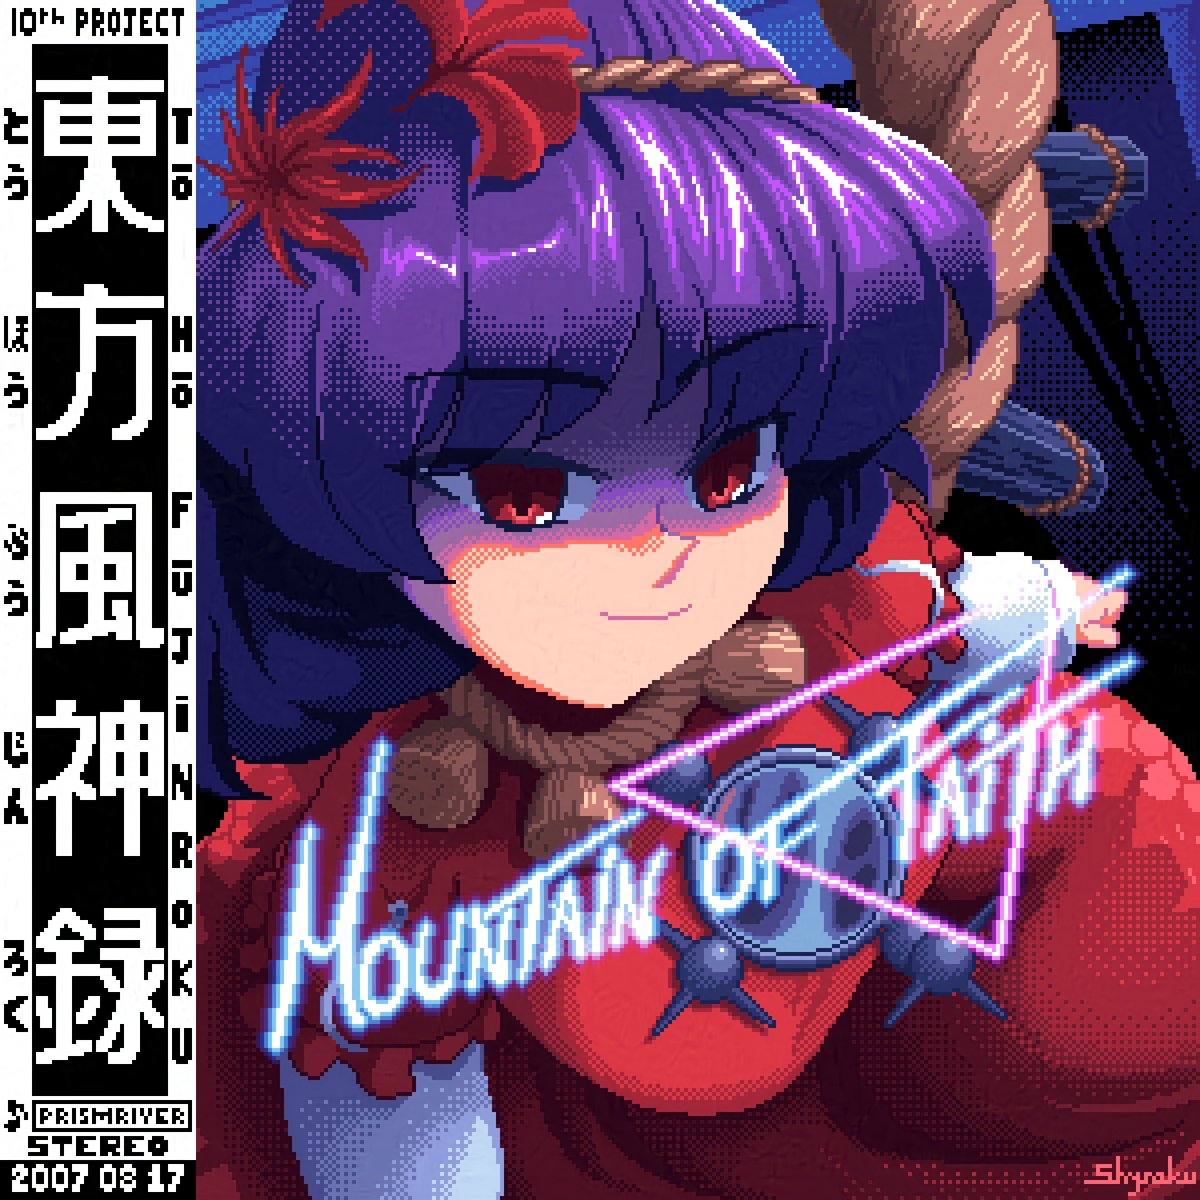 Touhou Project - Mountain of Faith

#pixelart #touhouproject #東方Project